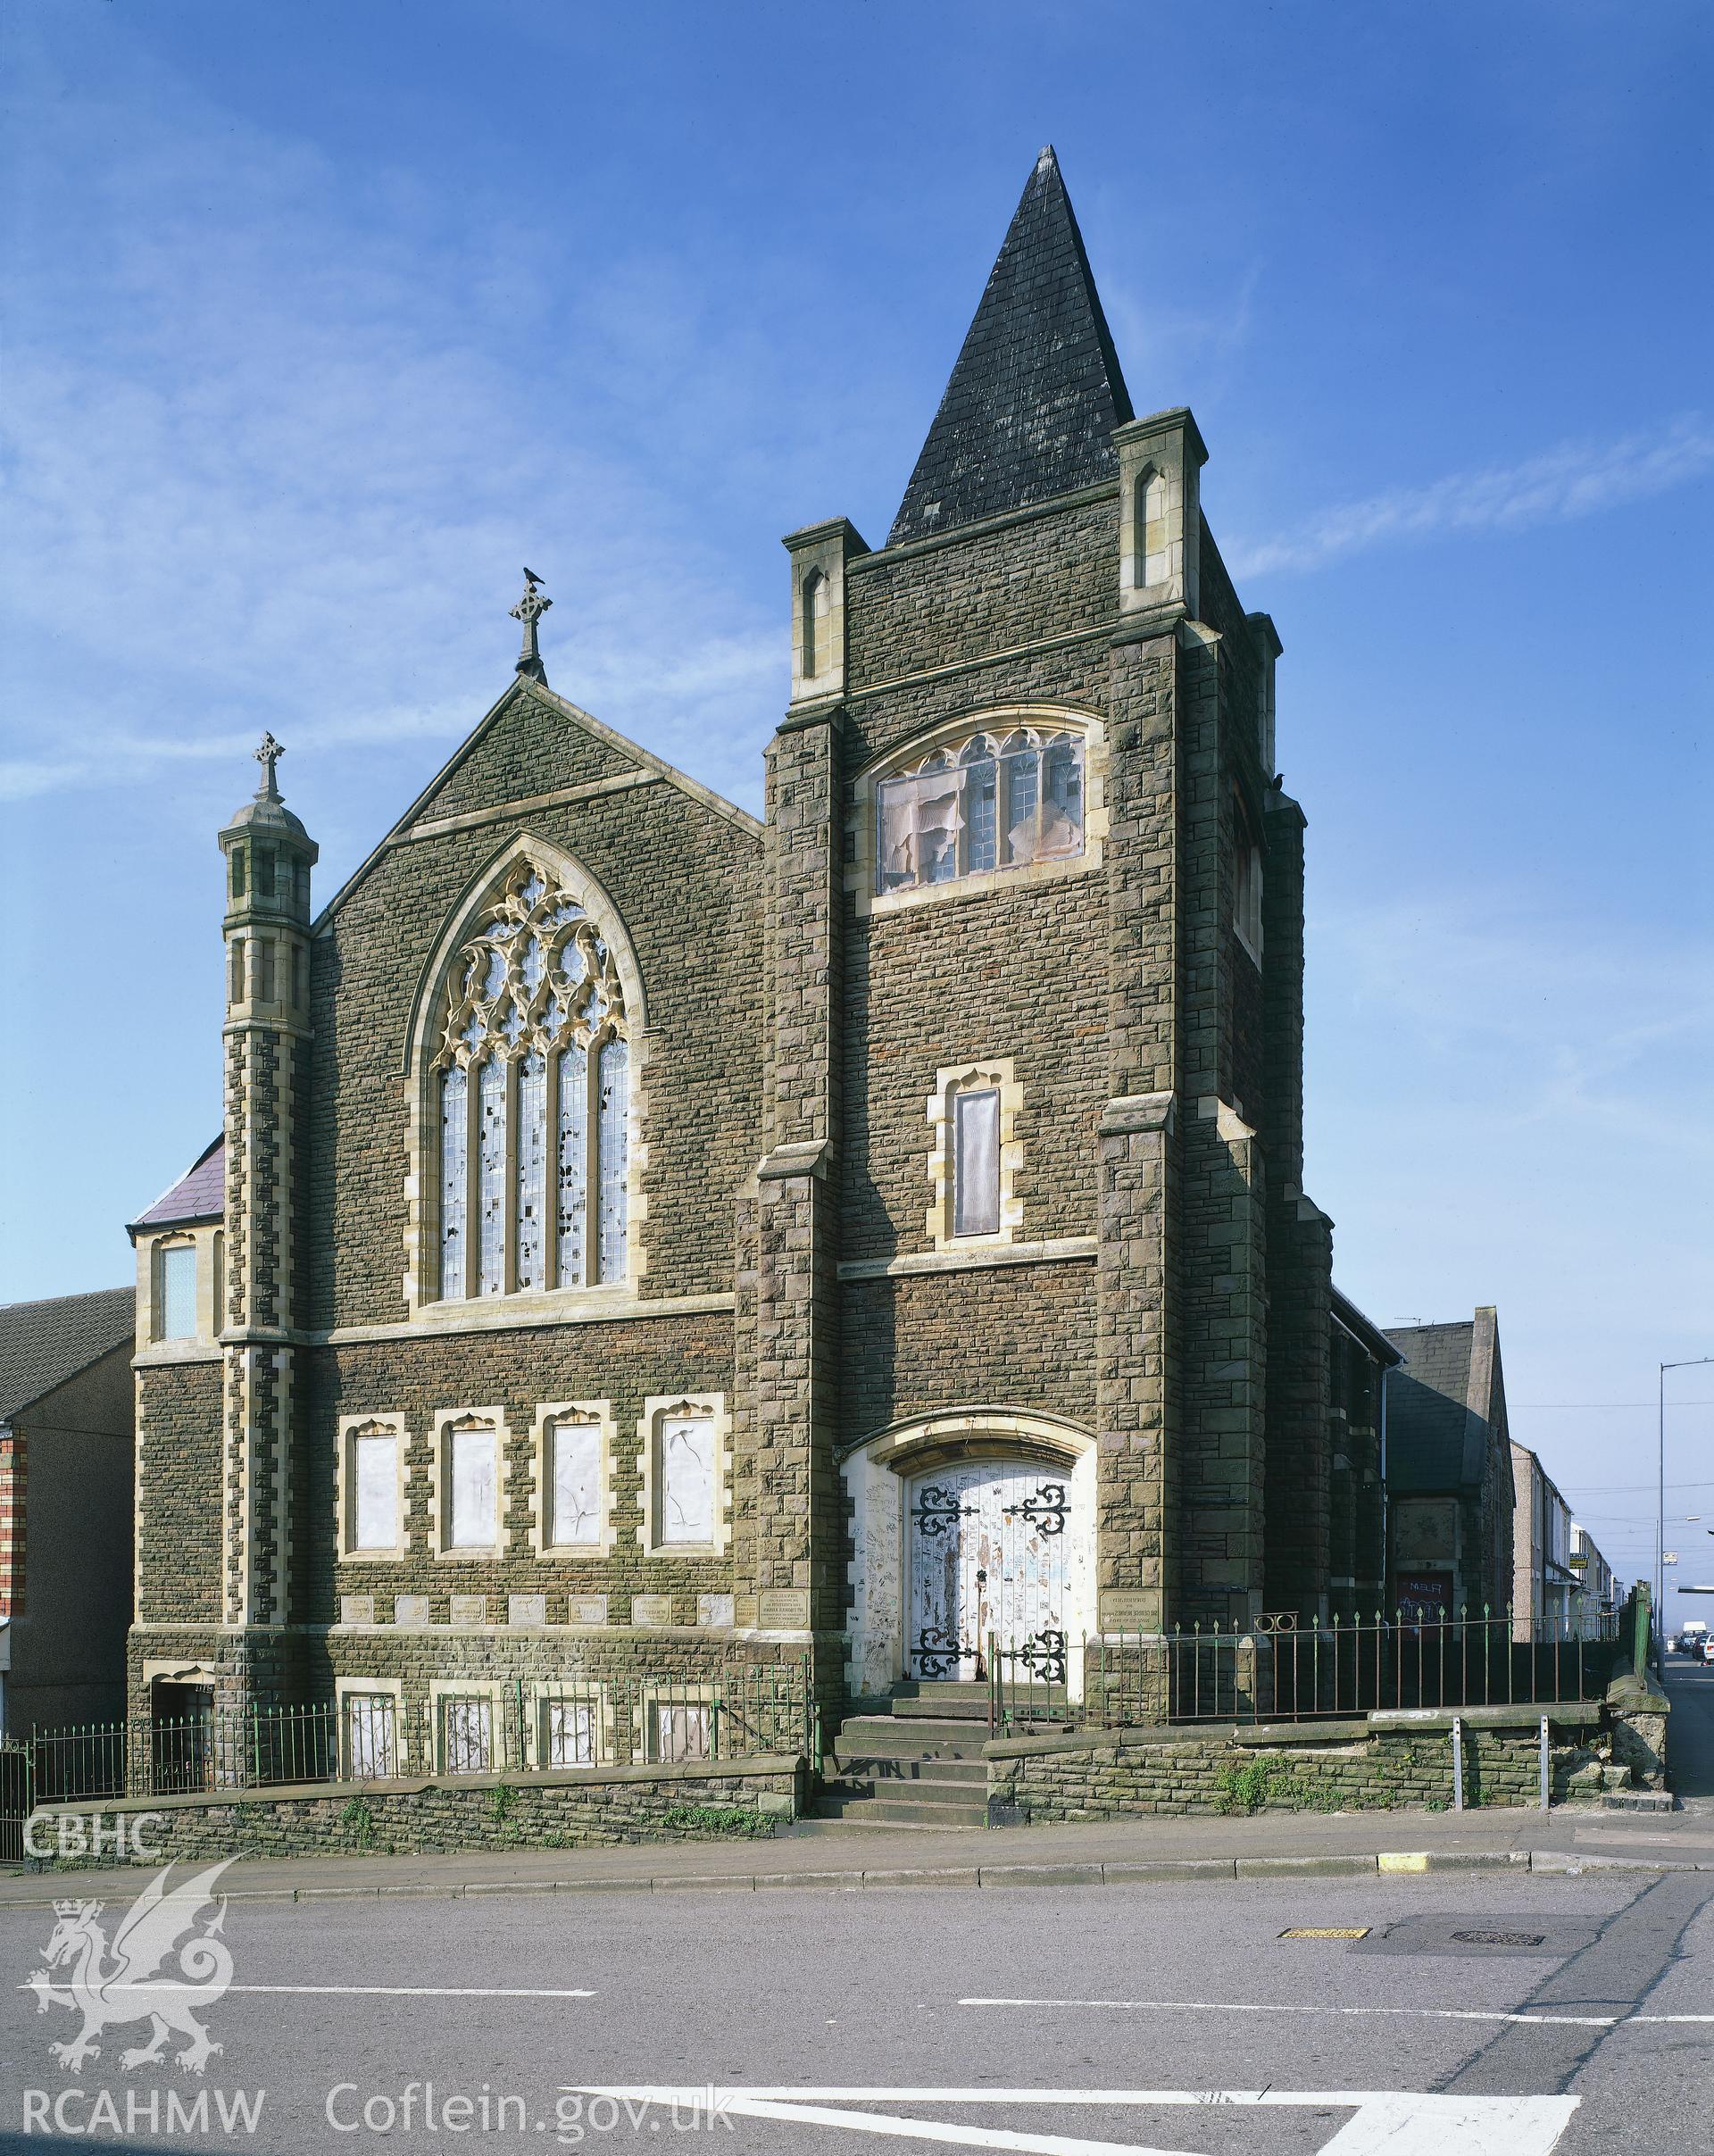 RCAHMW colour transparency showing view of Mount Calvary Chapel, Swansea.